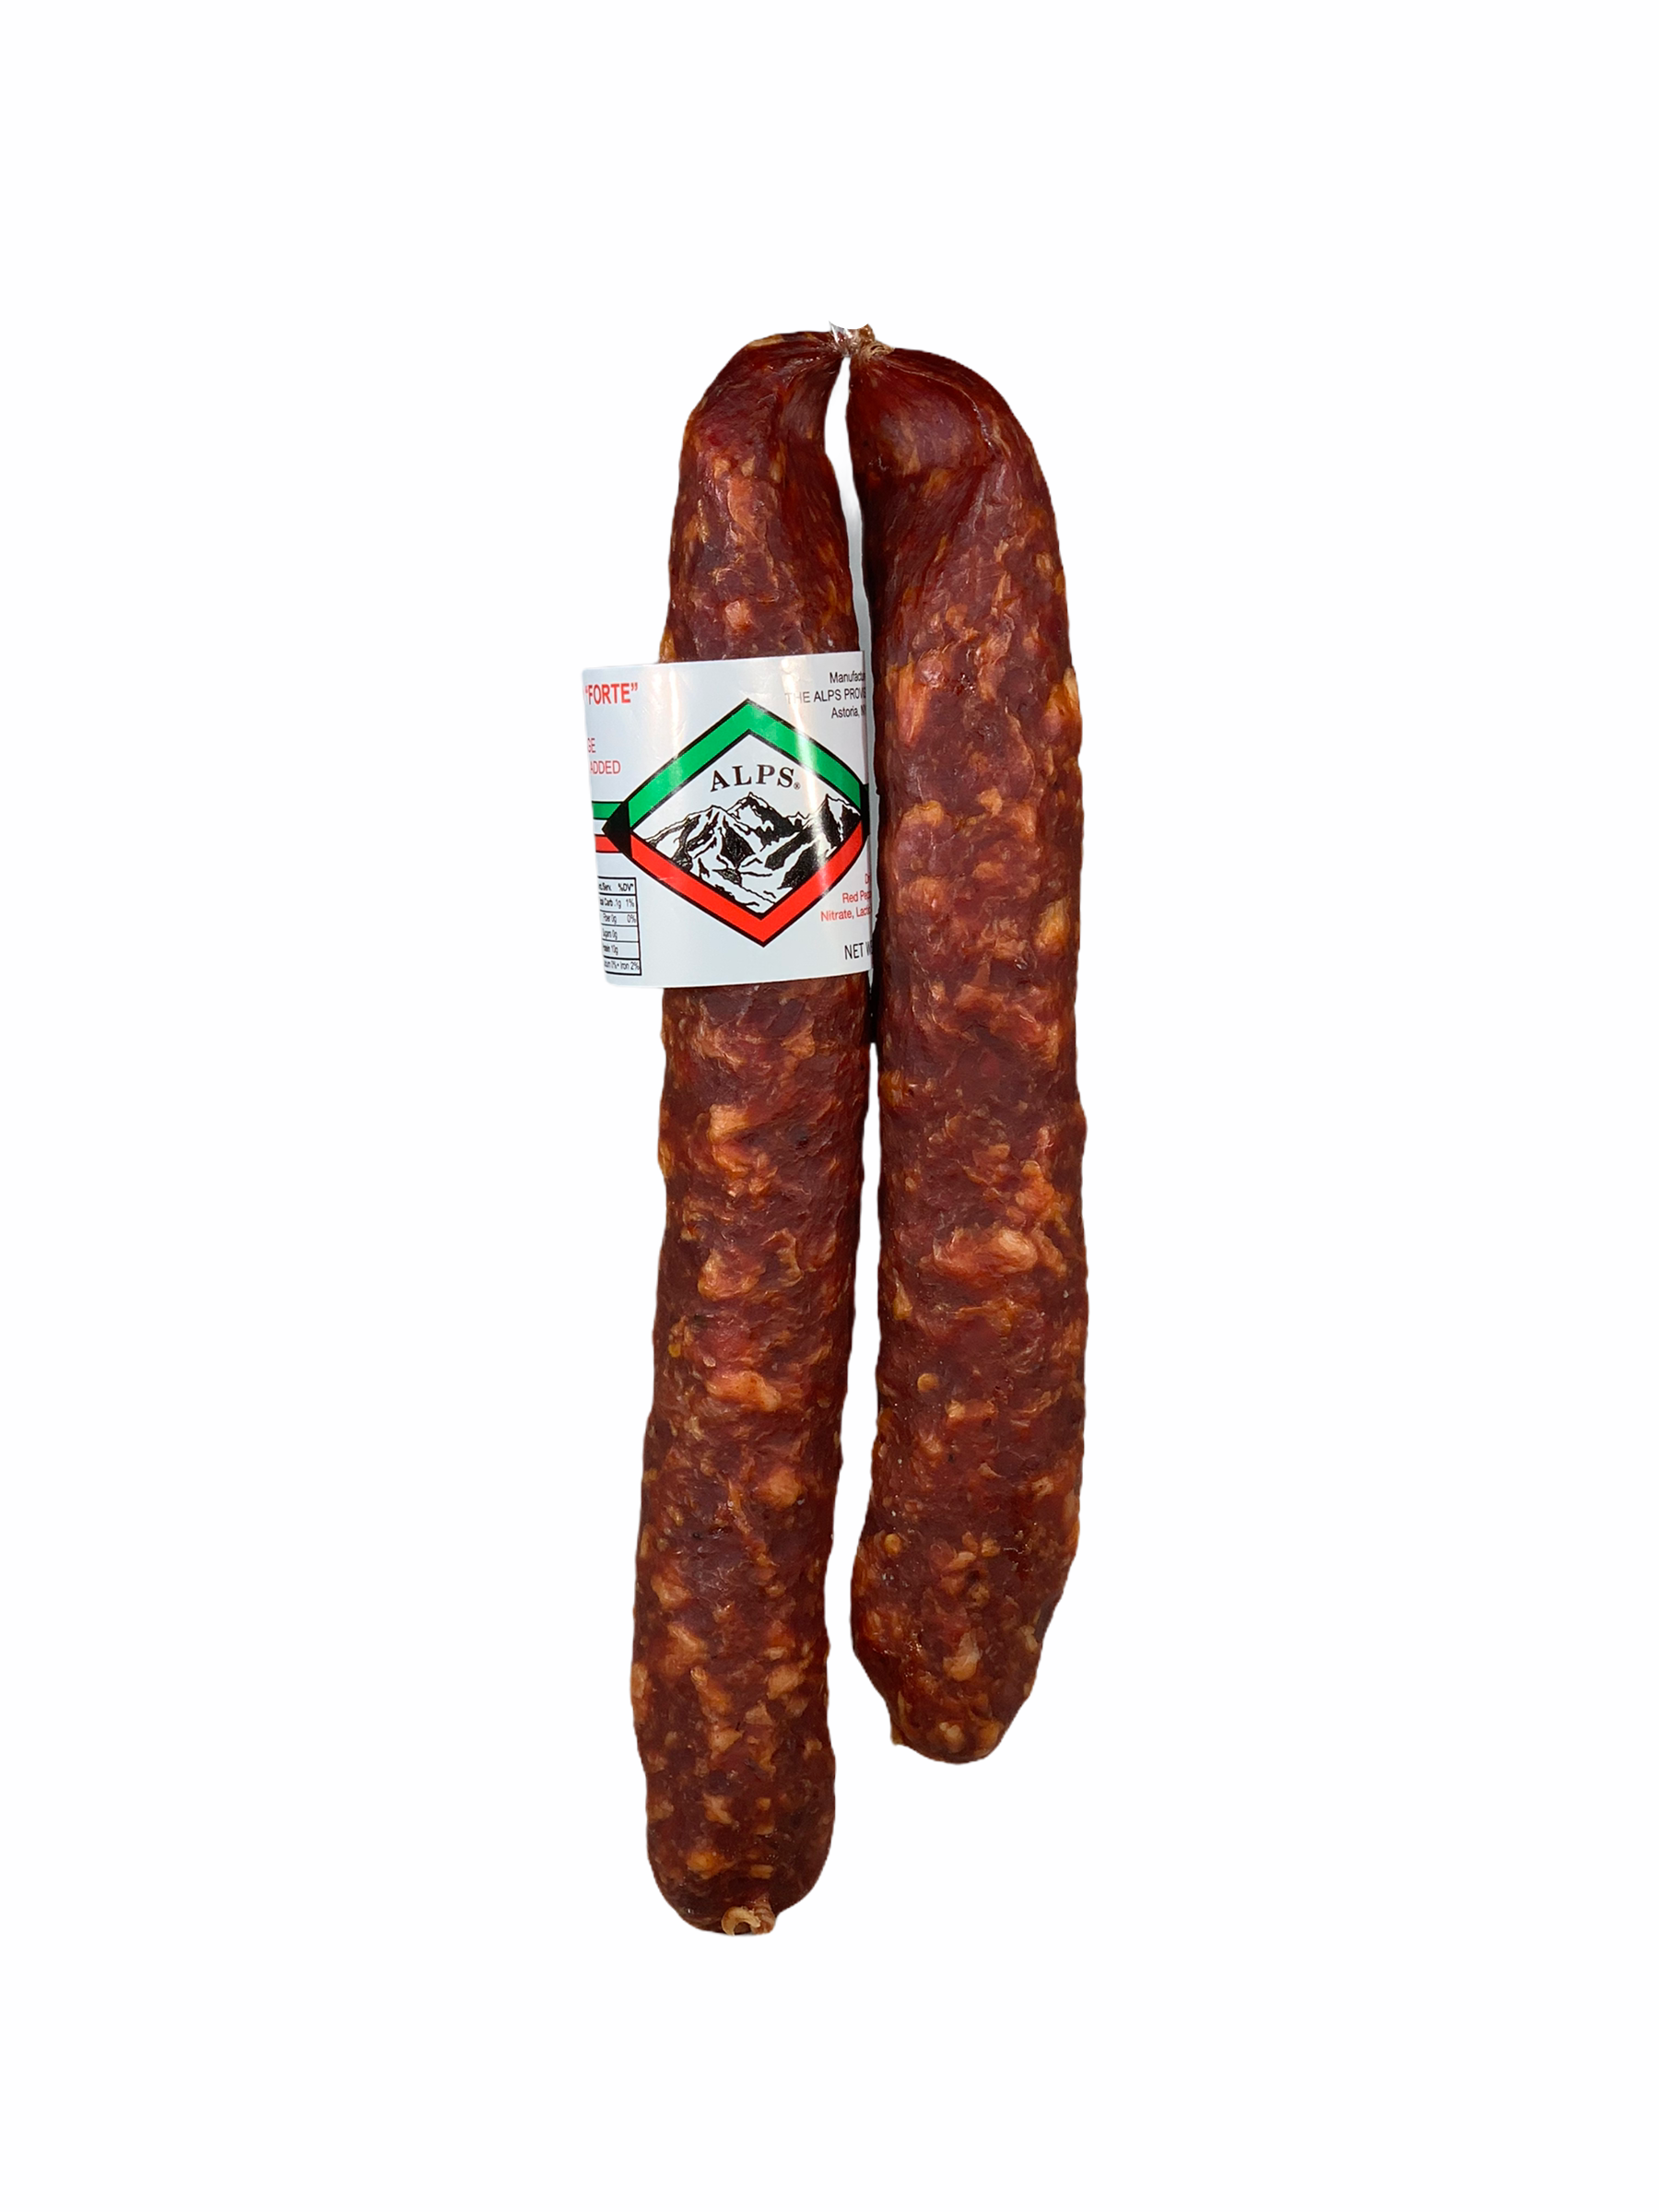 Spicy Dry Sausage Alps, 2 links approximately 1Lb